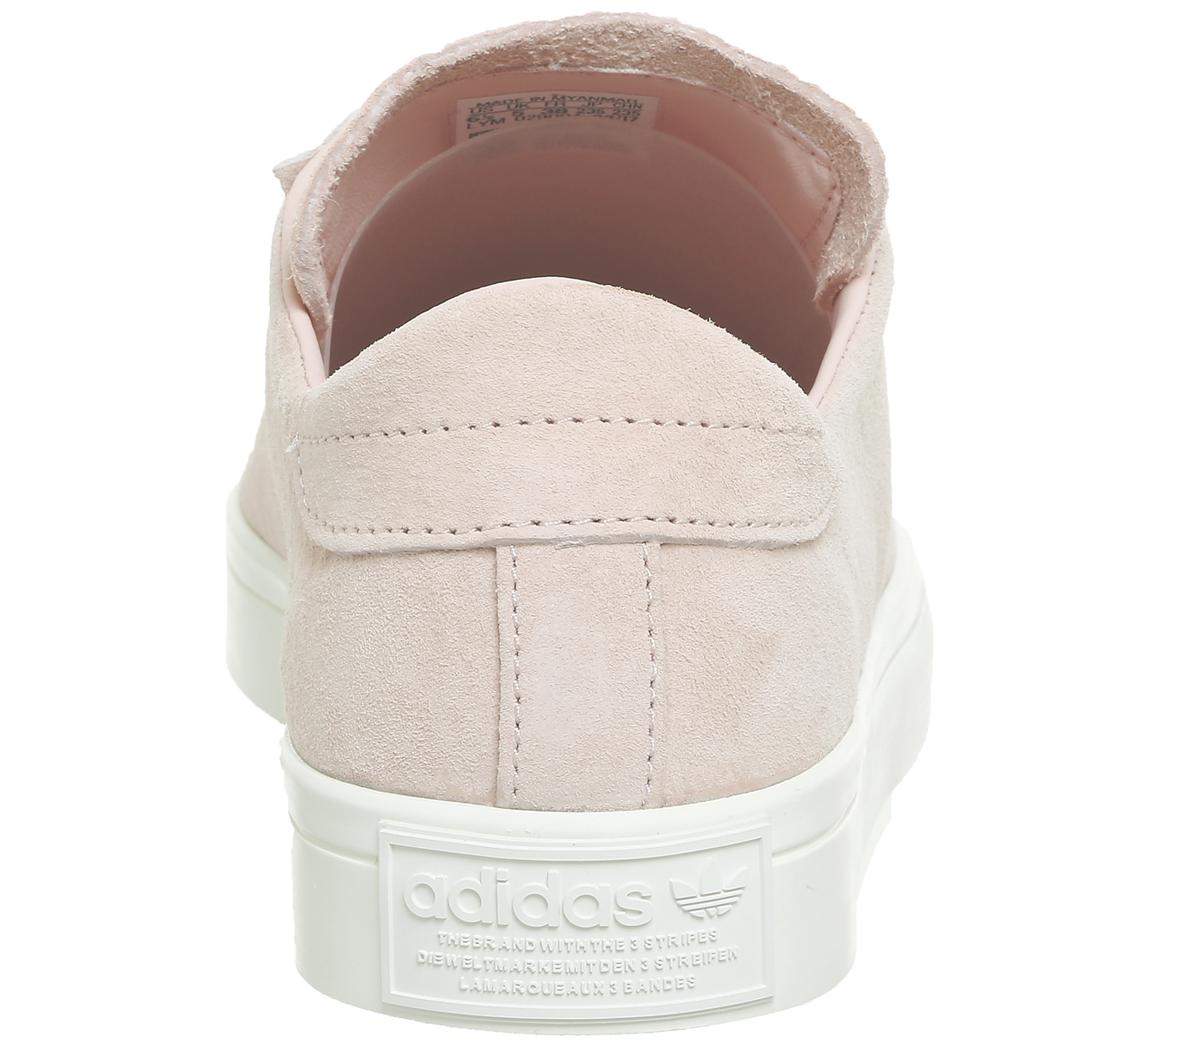 adidas court vantage trainers vapour pink off white exclusive